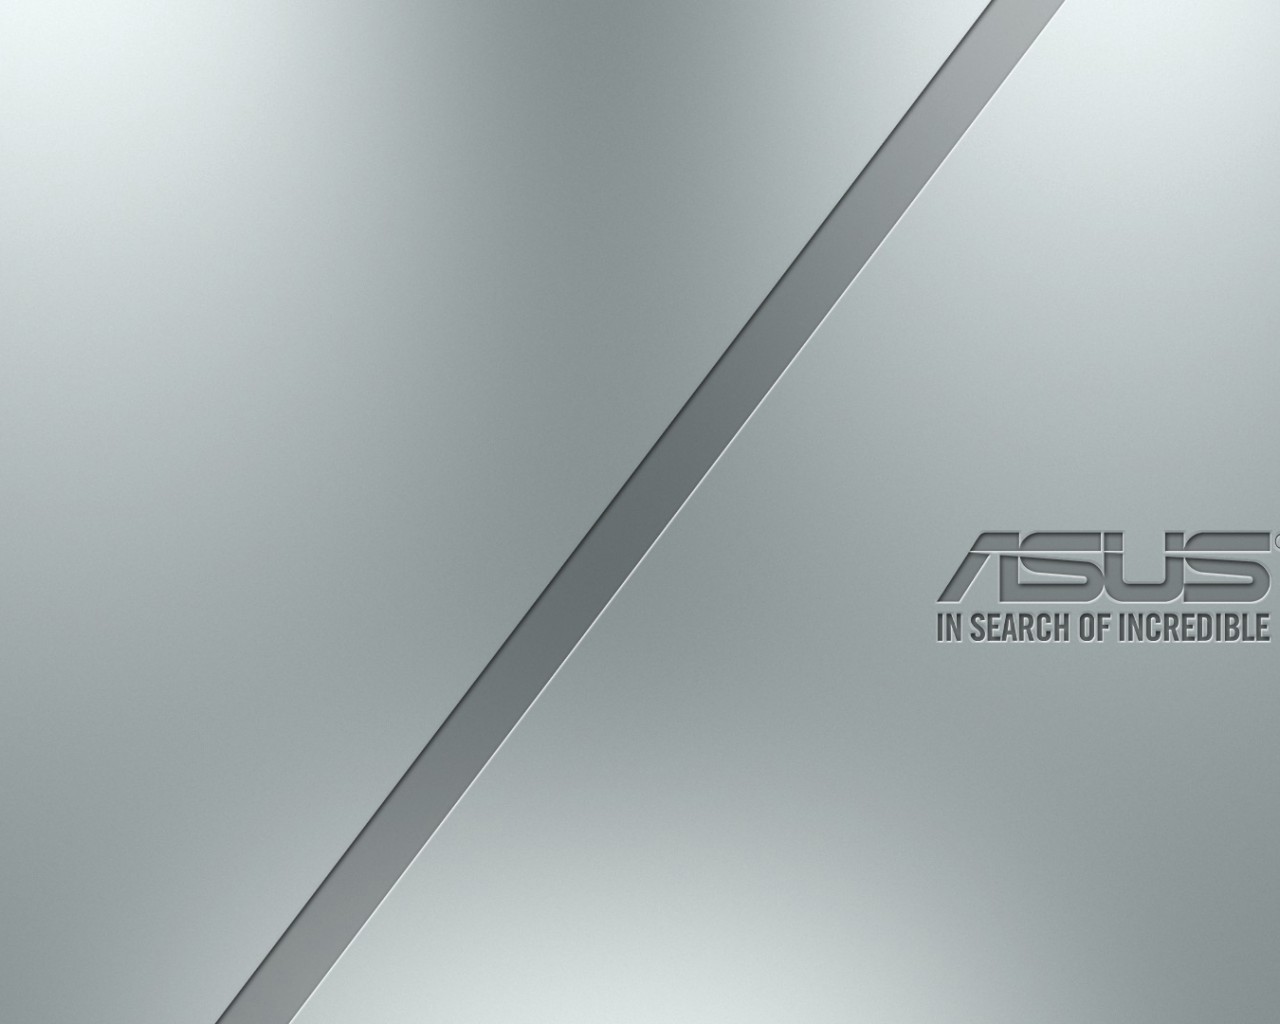 Asus, Technology Brand, In Search Of Incredible, Silver, - Asus - HD Wallpaper 